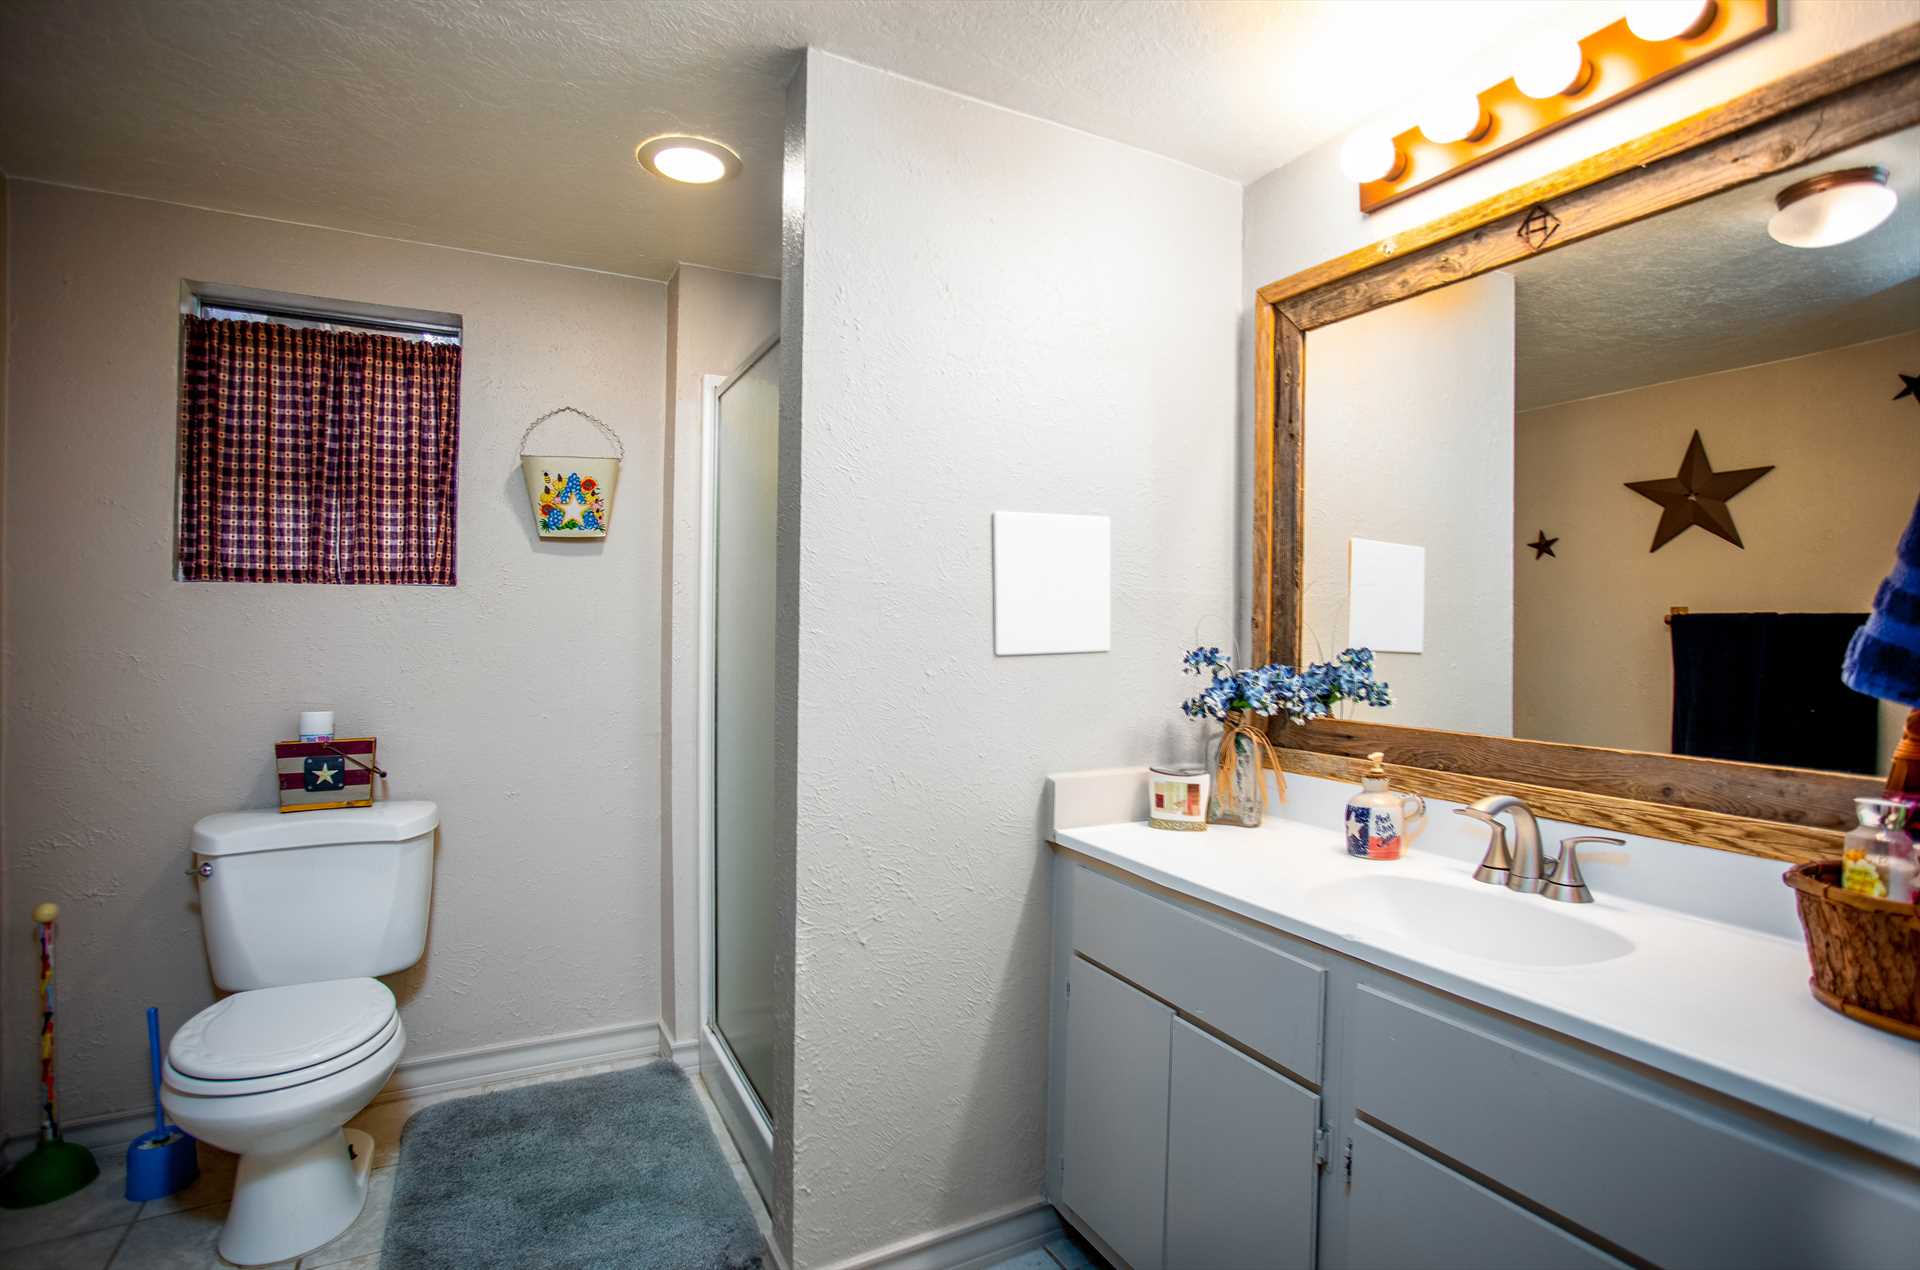                                                 A walk-in shower and spacious vanity are two of the cleanup highlights in the spotless bathroom...and soft and fresh linens are provided.